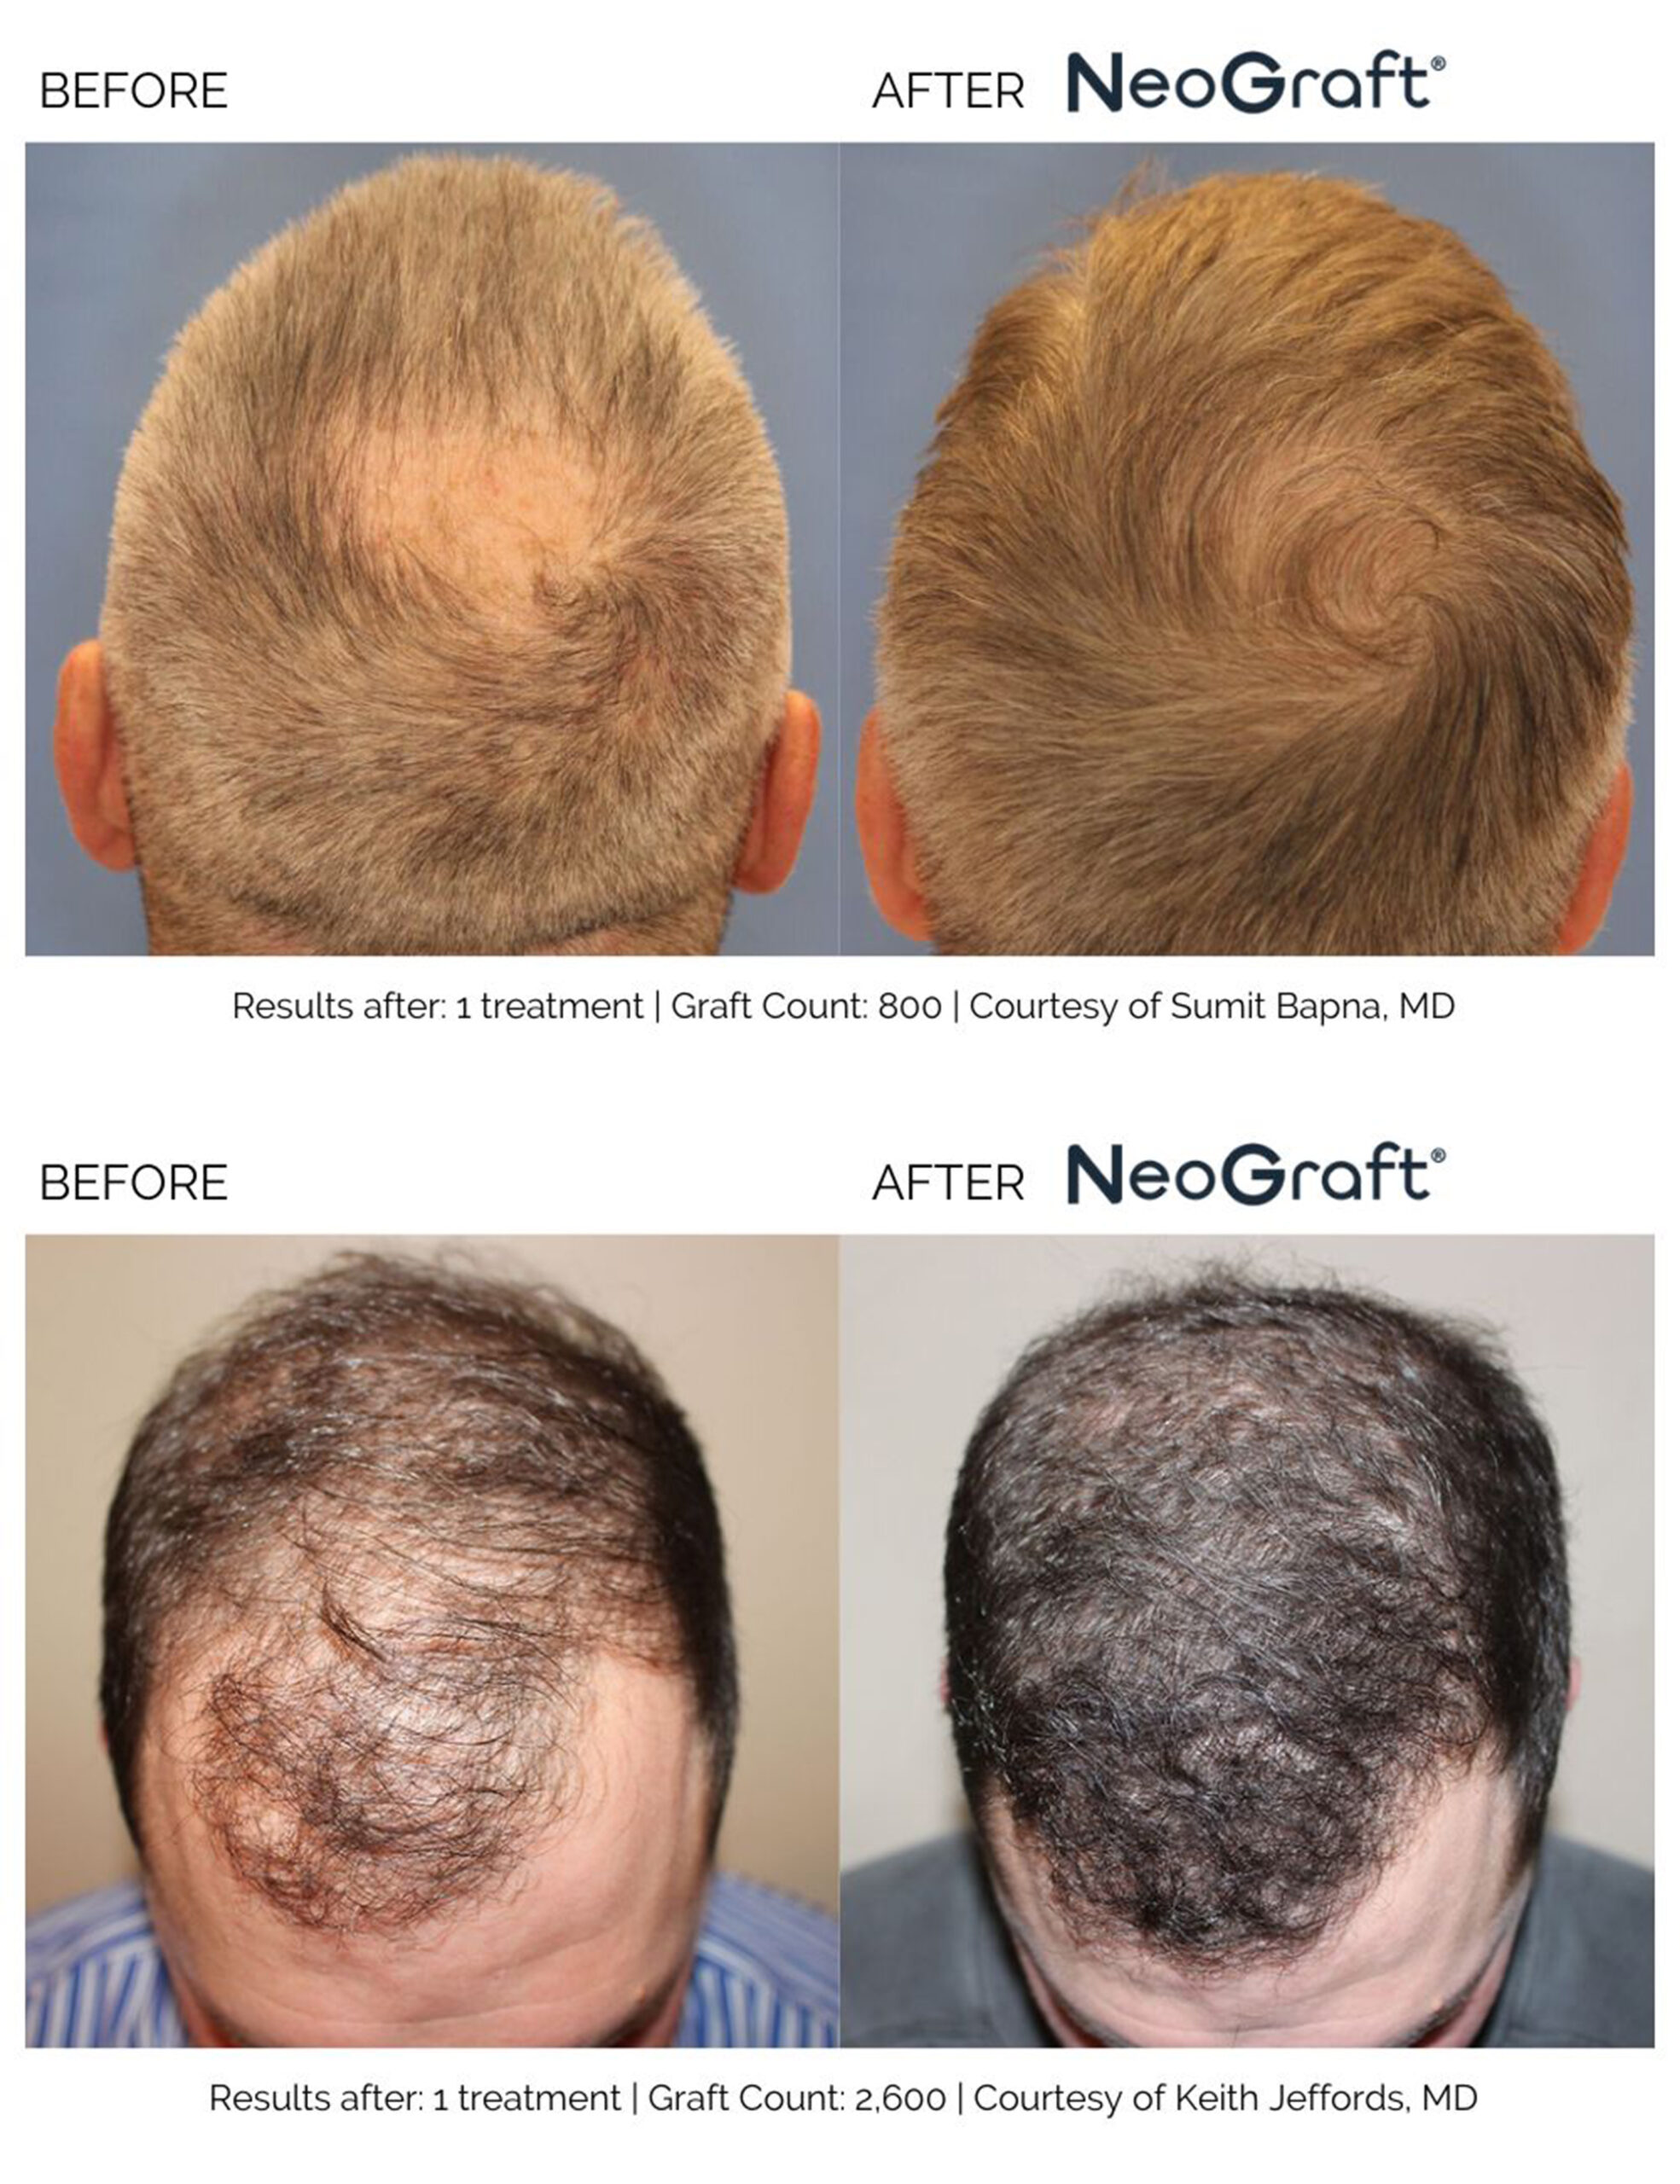 Two men's before photos showing receding hair compared to after NeoGraft hair transplant restoring a full head of hair.